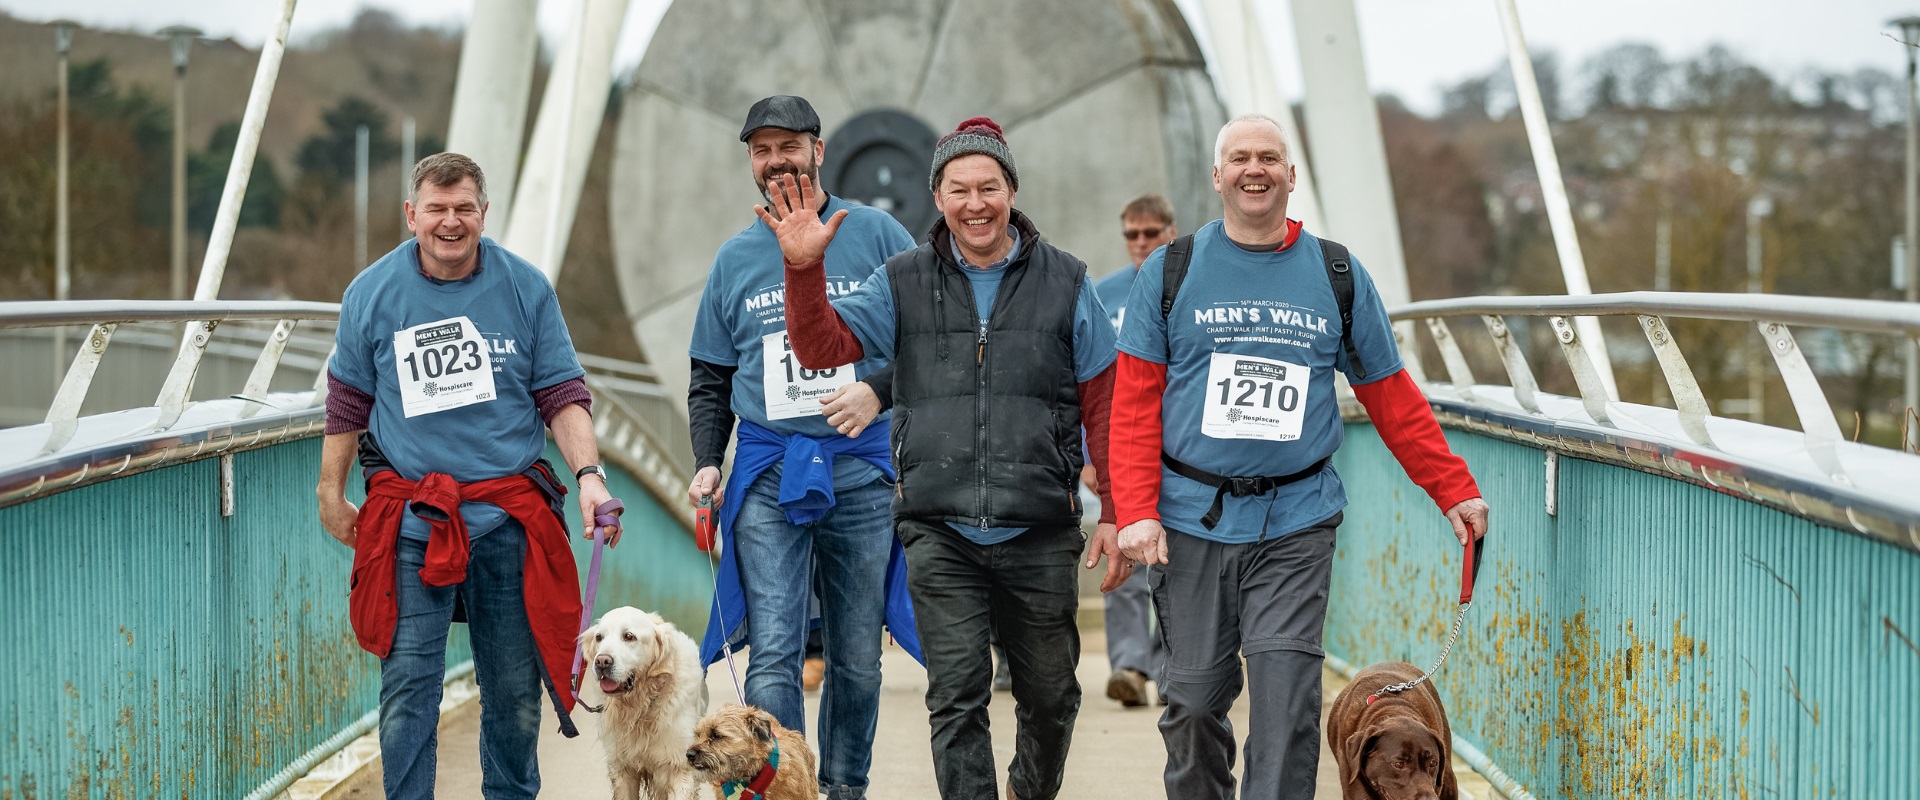 How You Can Support Men’s Walk